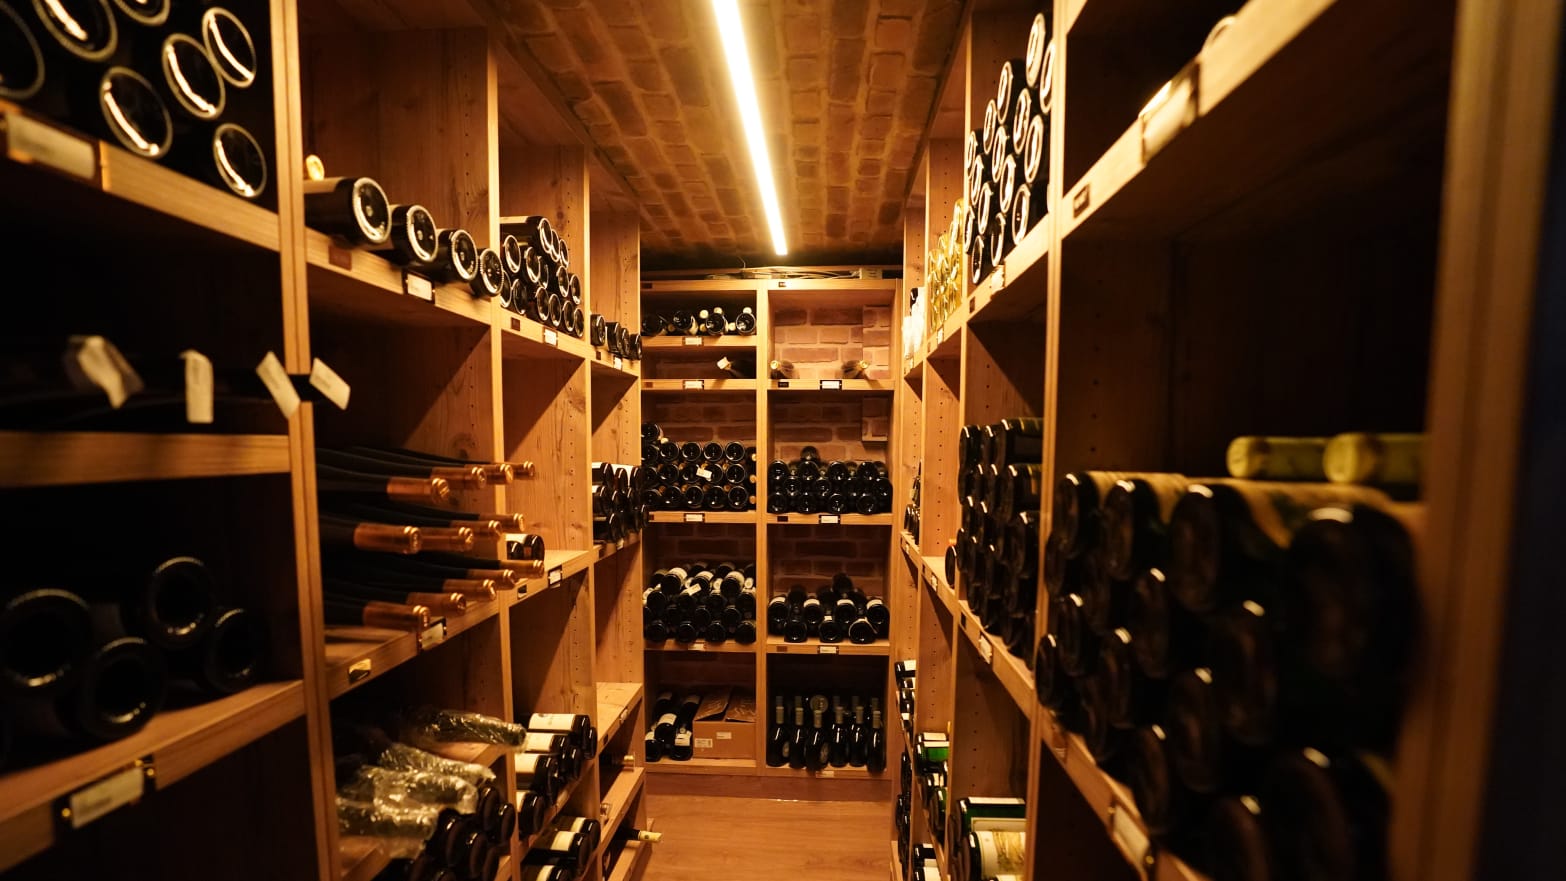 Bottles of red wine lie on shelves in the wine cellar of a luxury hotel.